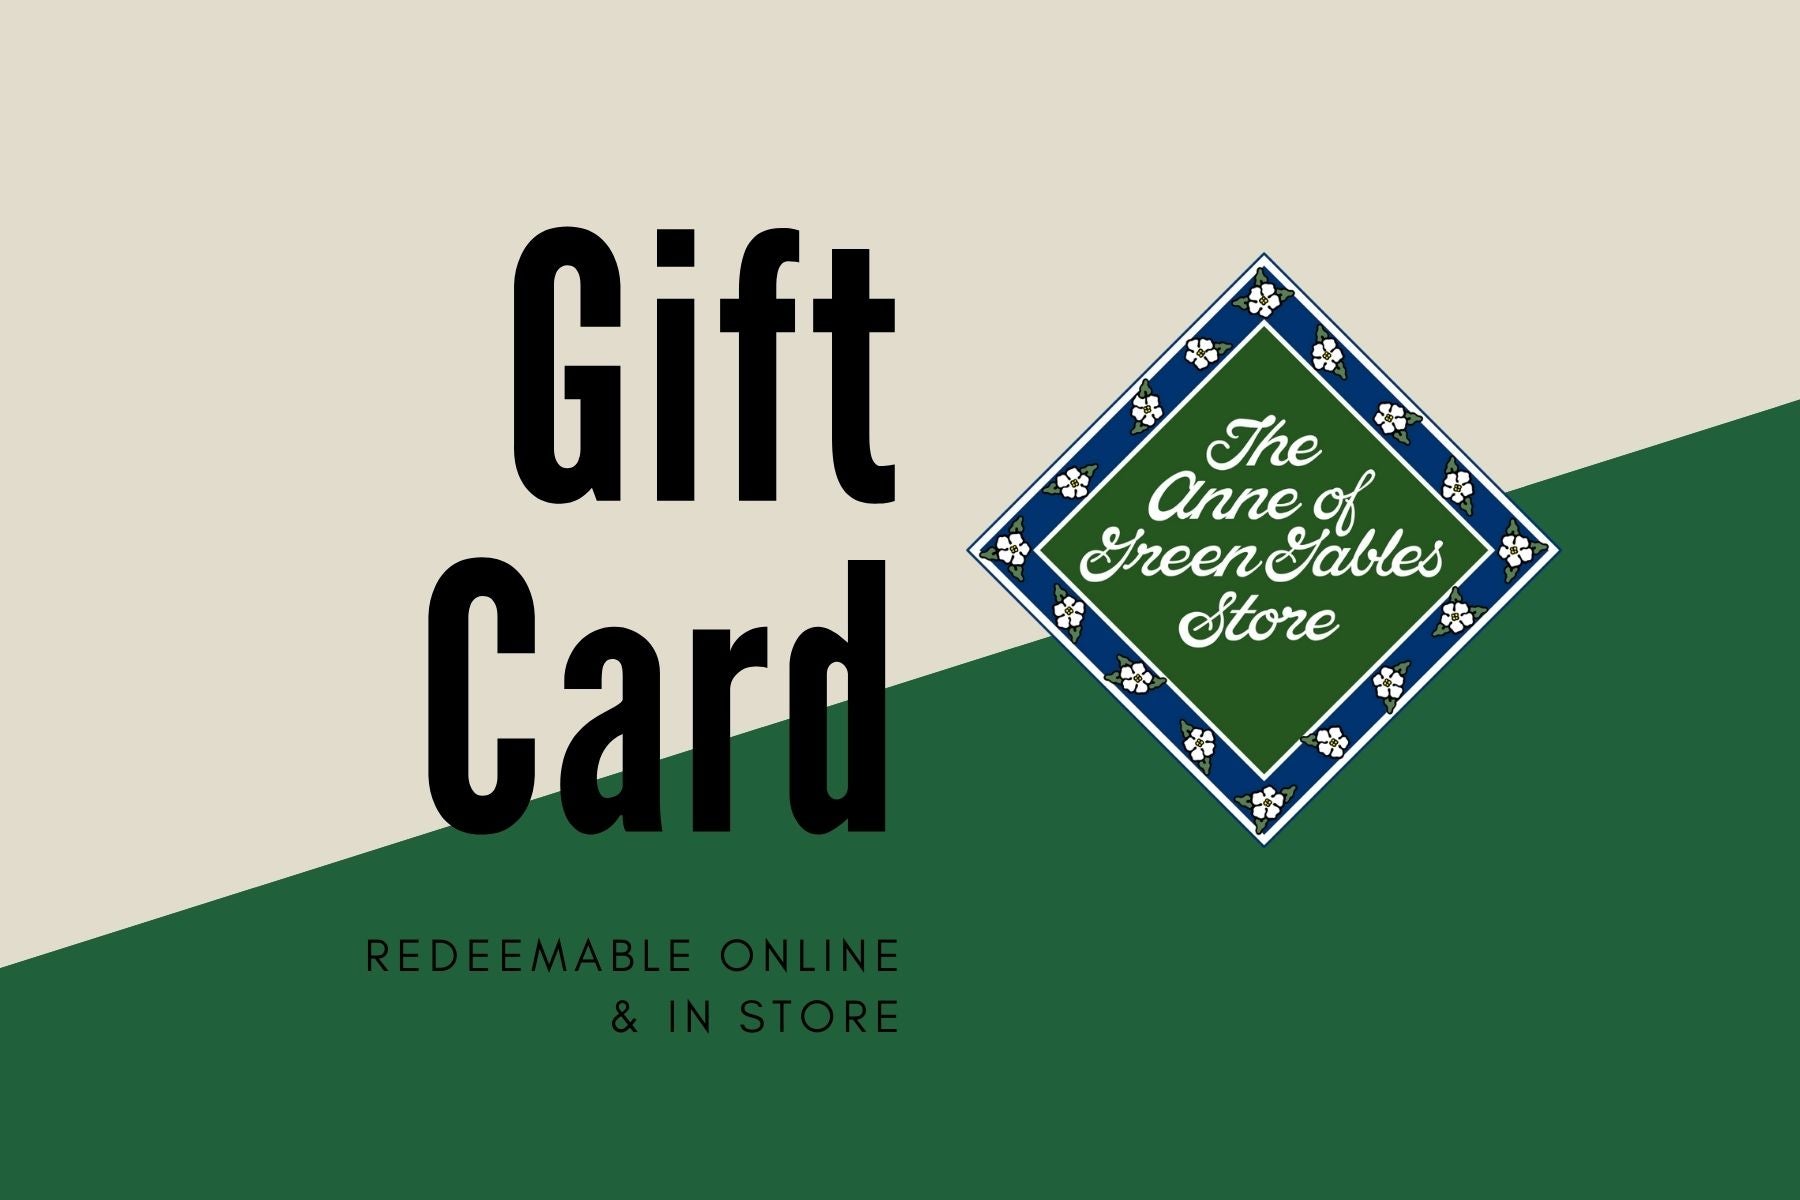 Anne of green gables gift card